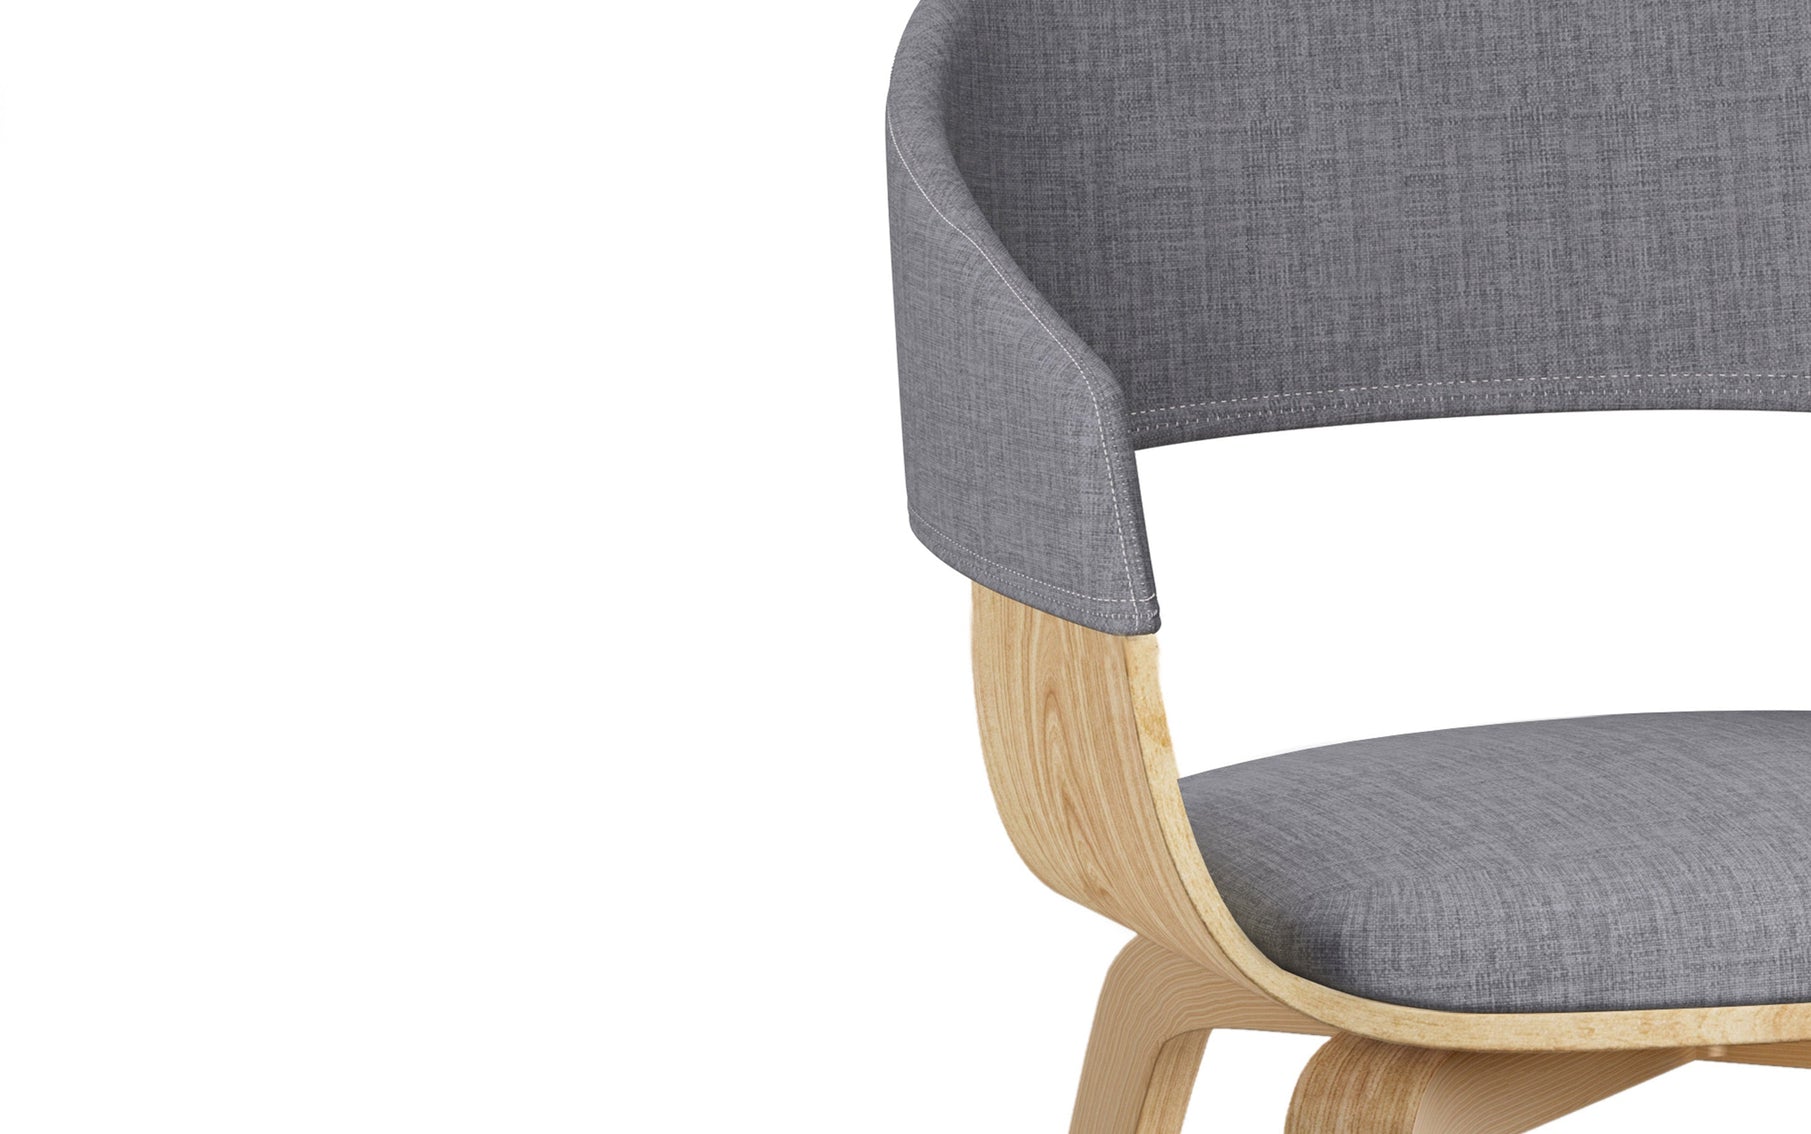 Light Grey Natural Oak Linen Style Fabric | Lowell Bentwood Dining Chair